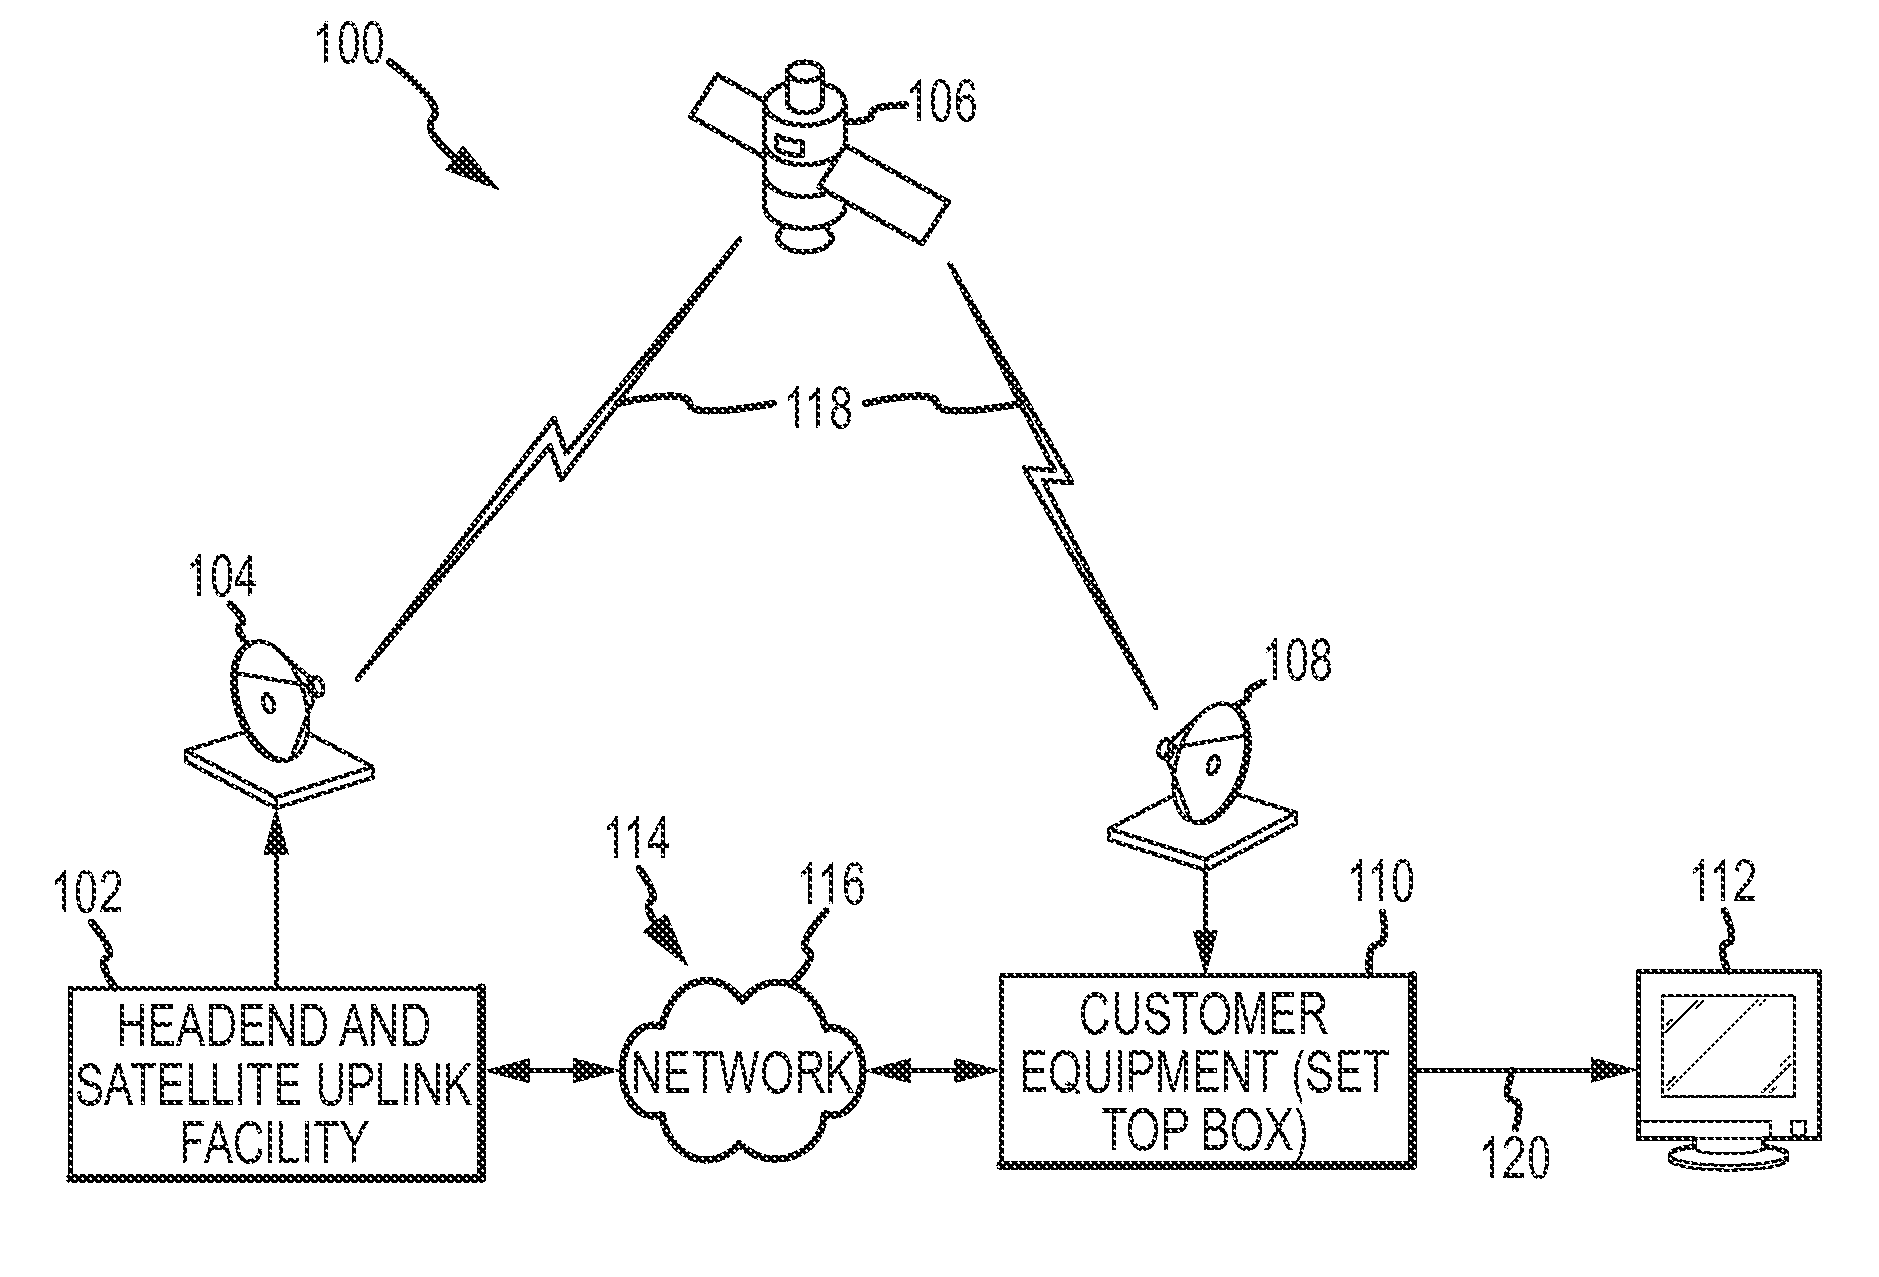 System and method for controlling alternative access to video events associated with video broadcast services